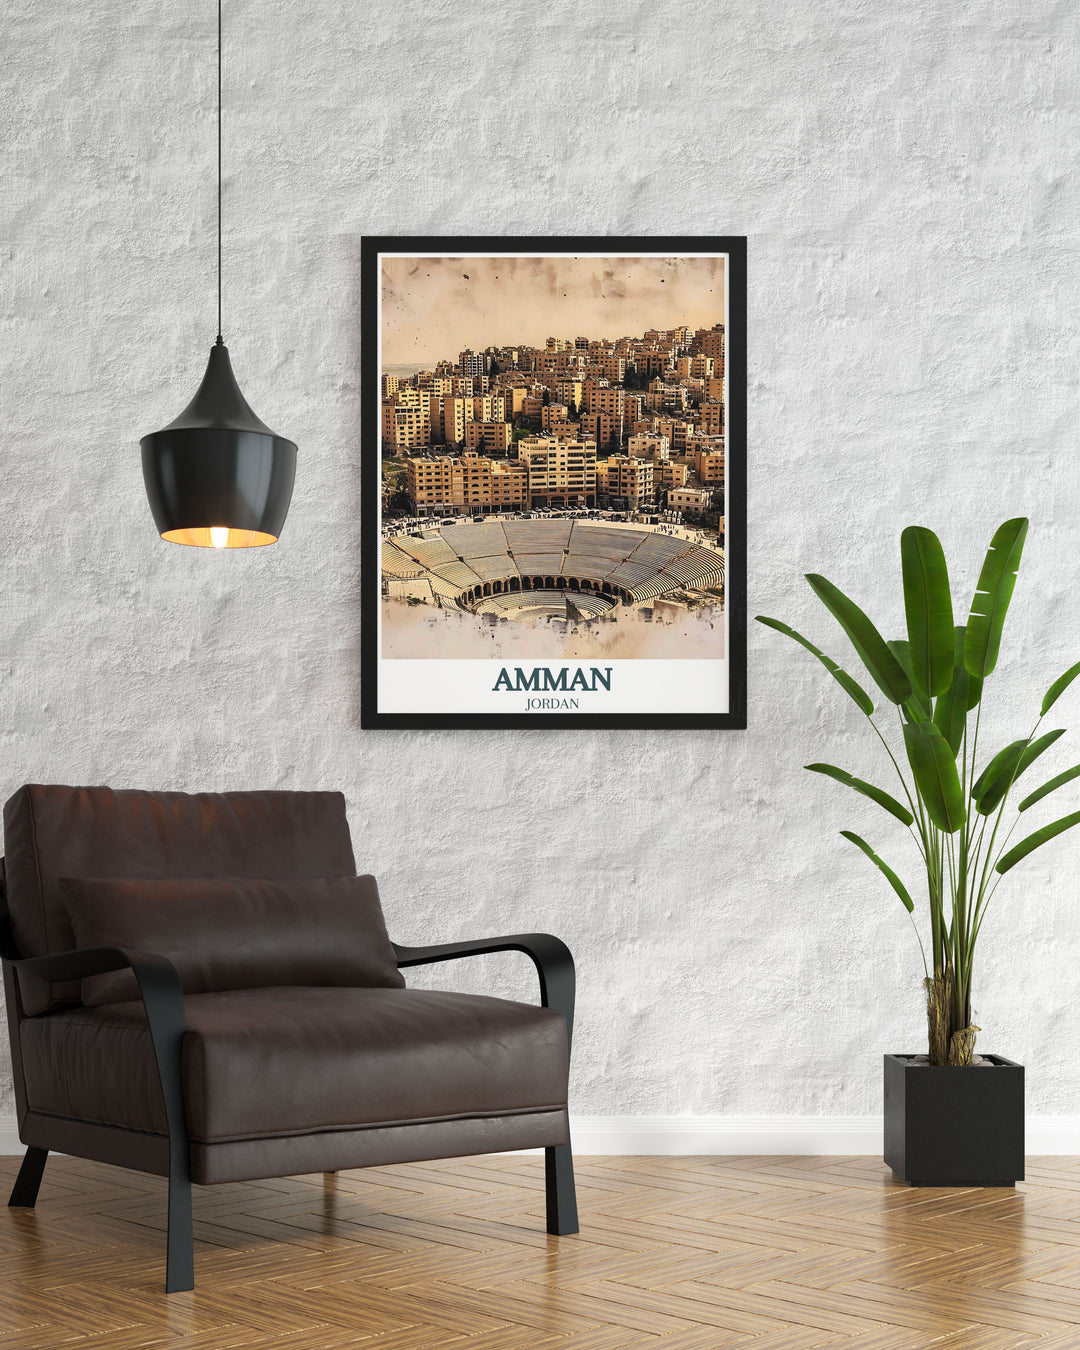 Captivating Amman Photo capturing the beauty of the Roman Ampitheater and Jabal Al Jofeh ideal for creating a travel themed wall art gallery in your home or office